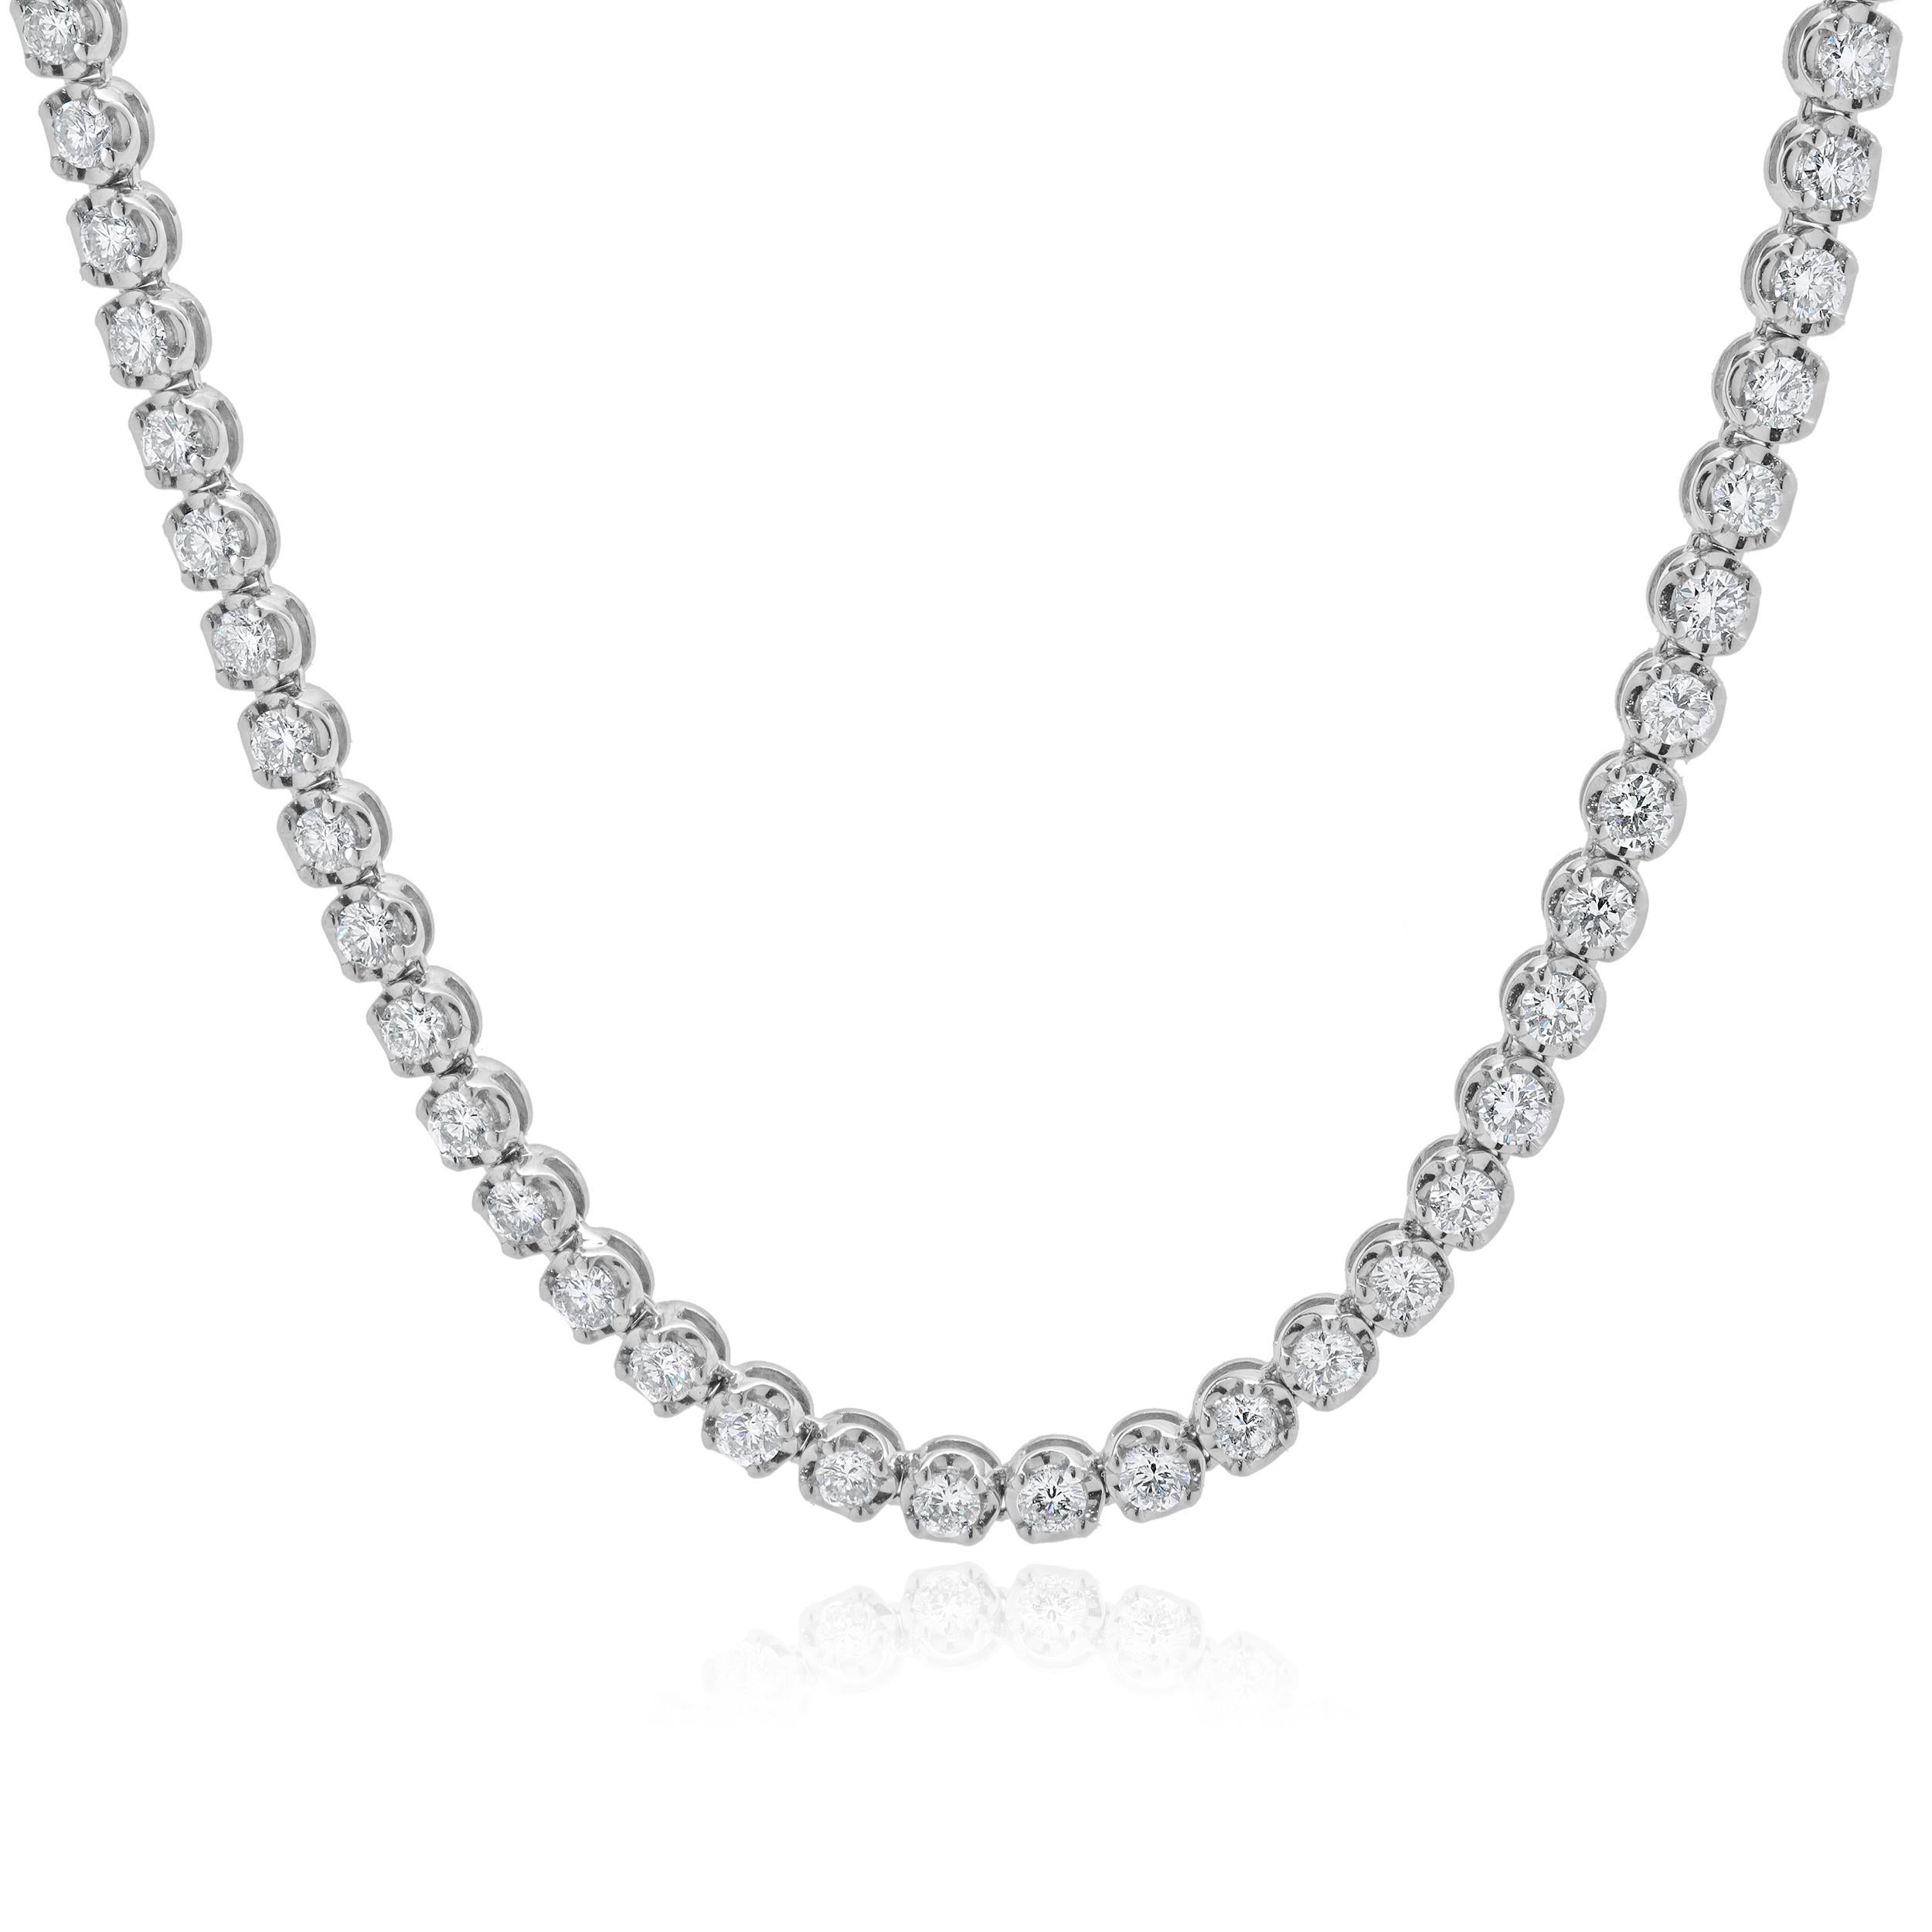 Designer: custom
Material: 14K white gold
Diamonds: 89 round brilliant cut = 6.30cttw
Color: G / H
Clarity: VS-SI1
Dimensions: necklace measures 16-inches in length 
Weight: 23.25 grams